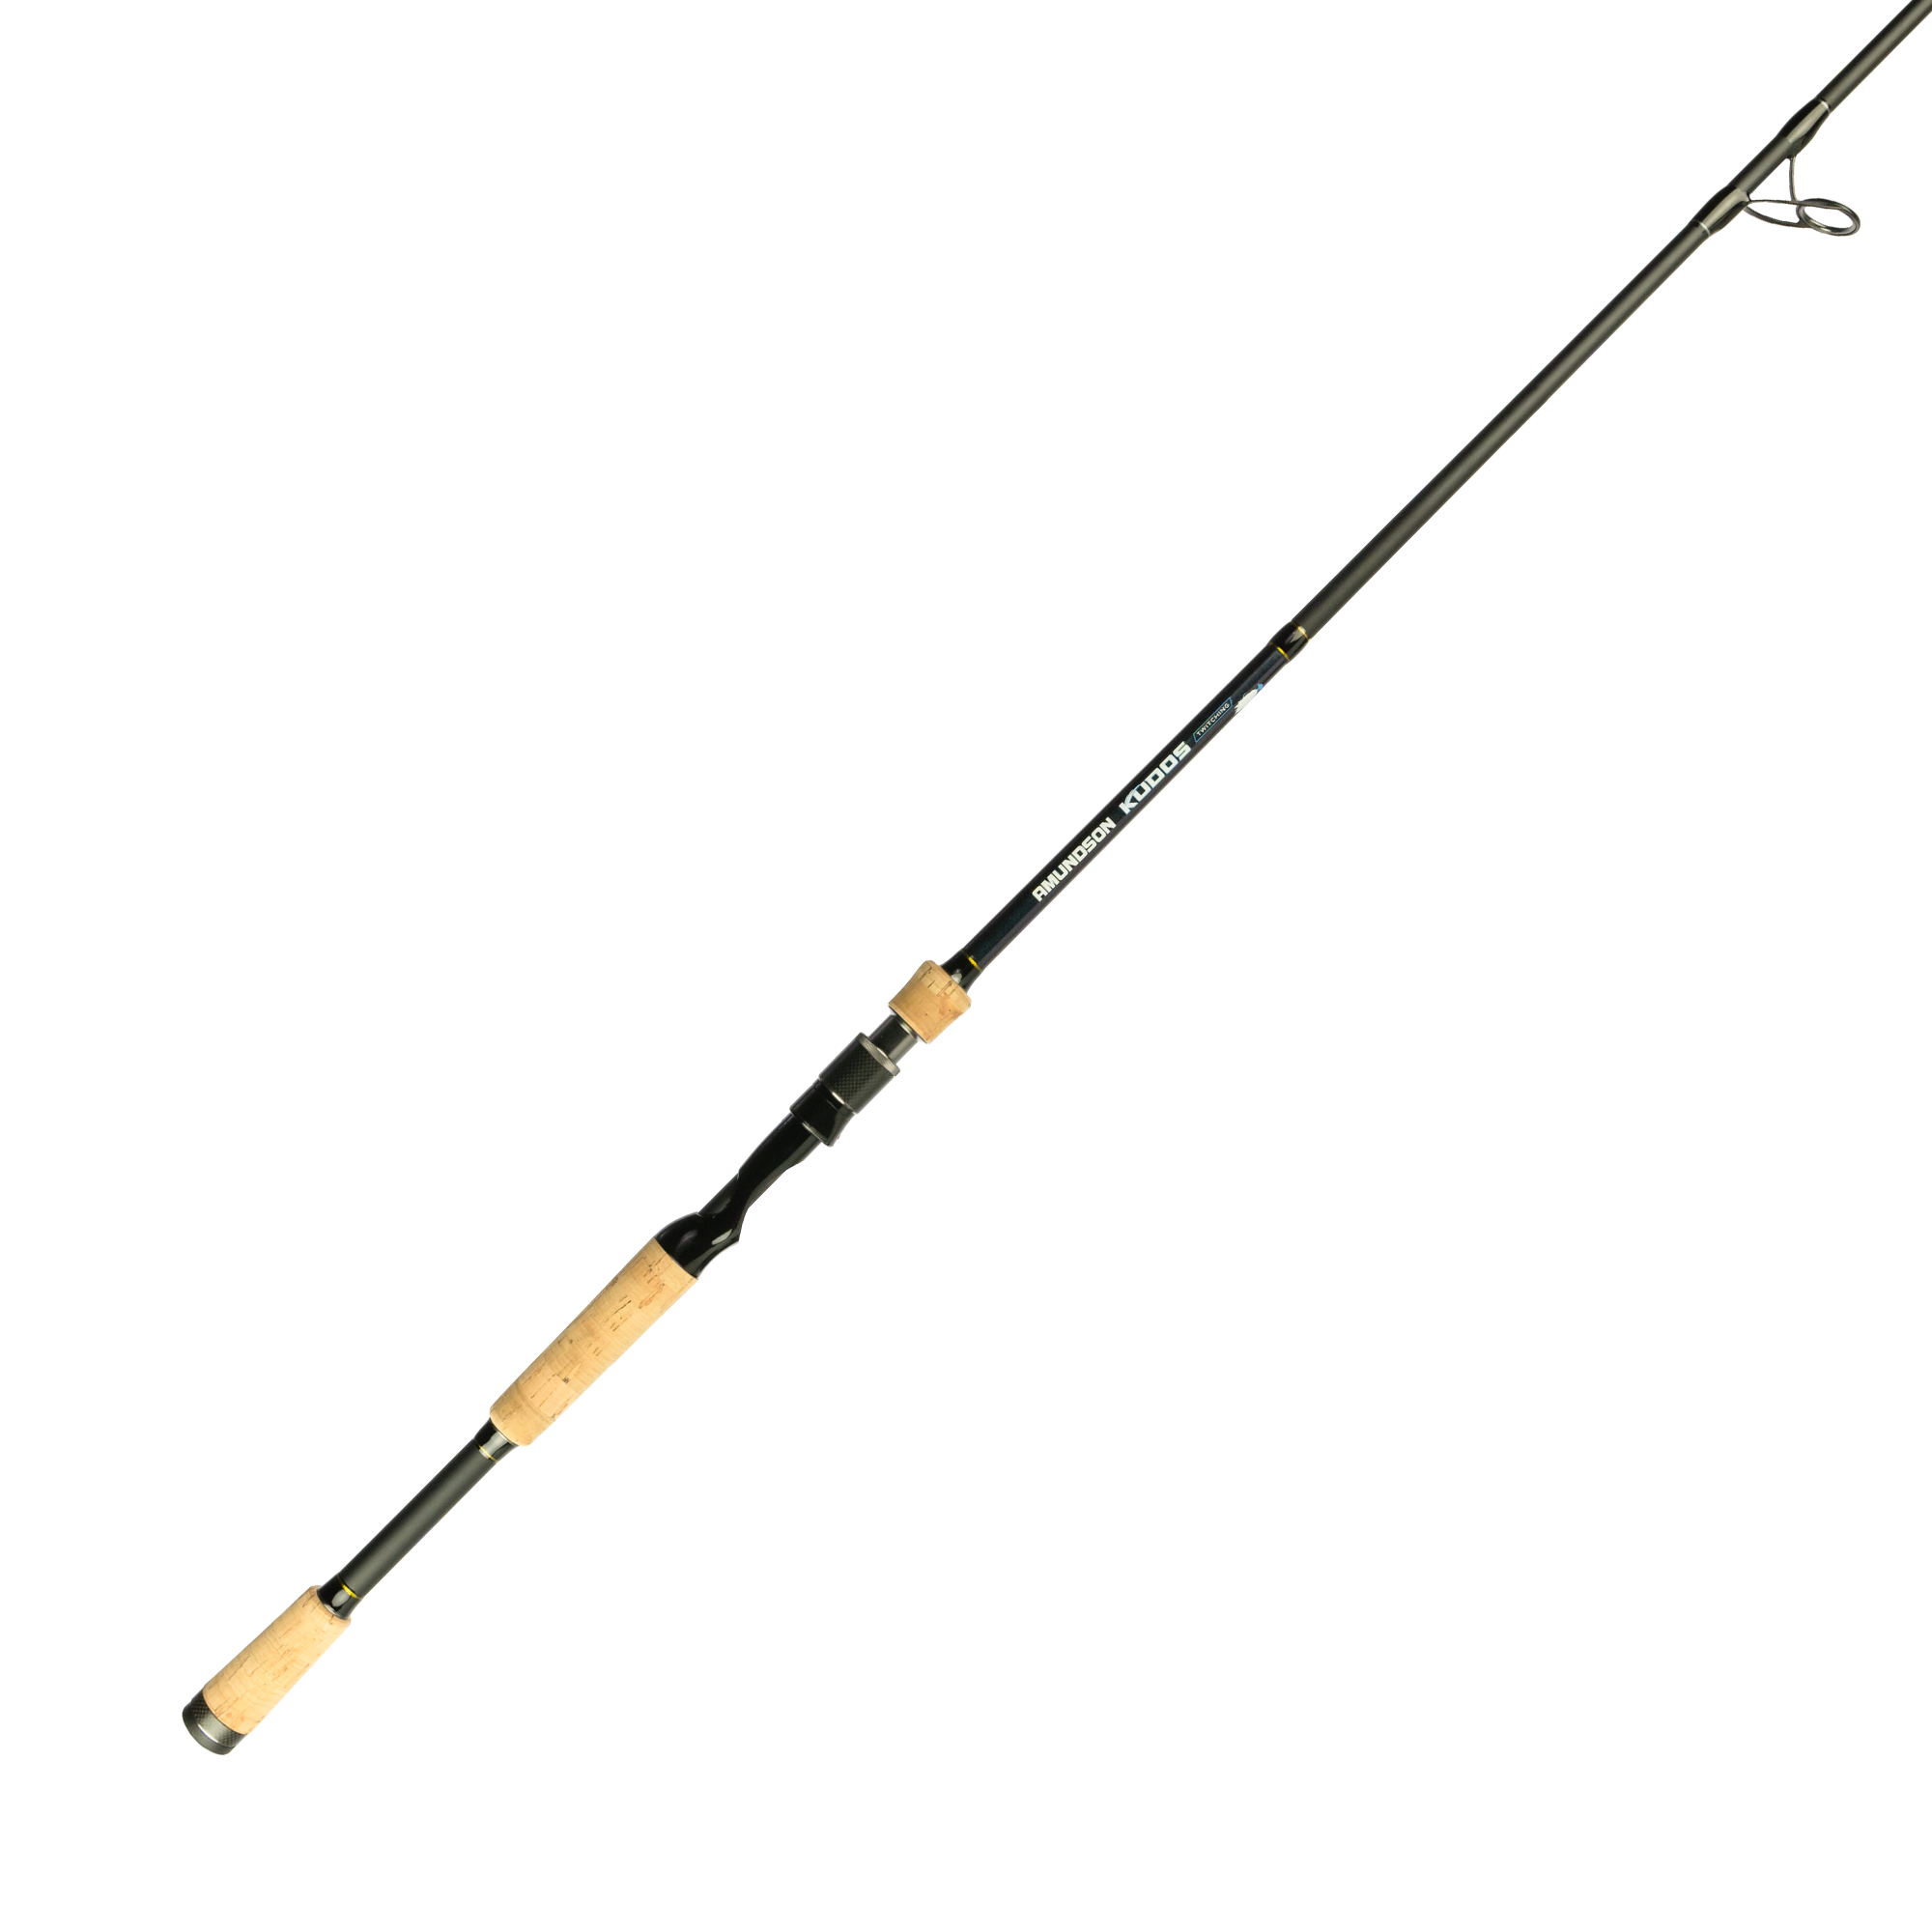 AIMTYD Resolute Fishing Rods, Spinning Rods & Casting Rods, Ultra-Sensitive  IM7 Carbon Fishing Rod Blanks, American Tackle Guides, American Tackle 2pc